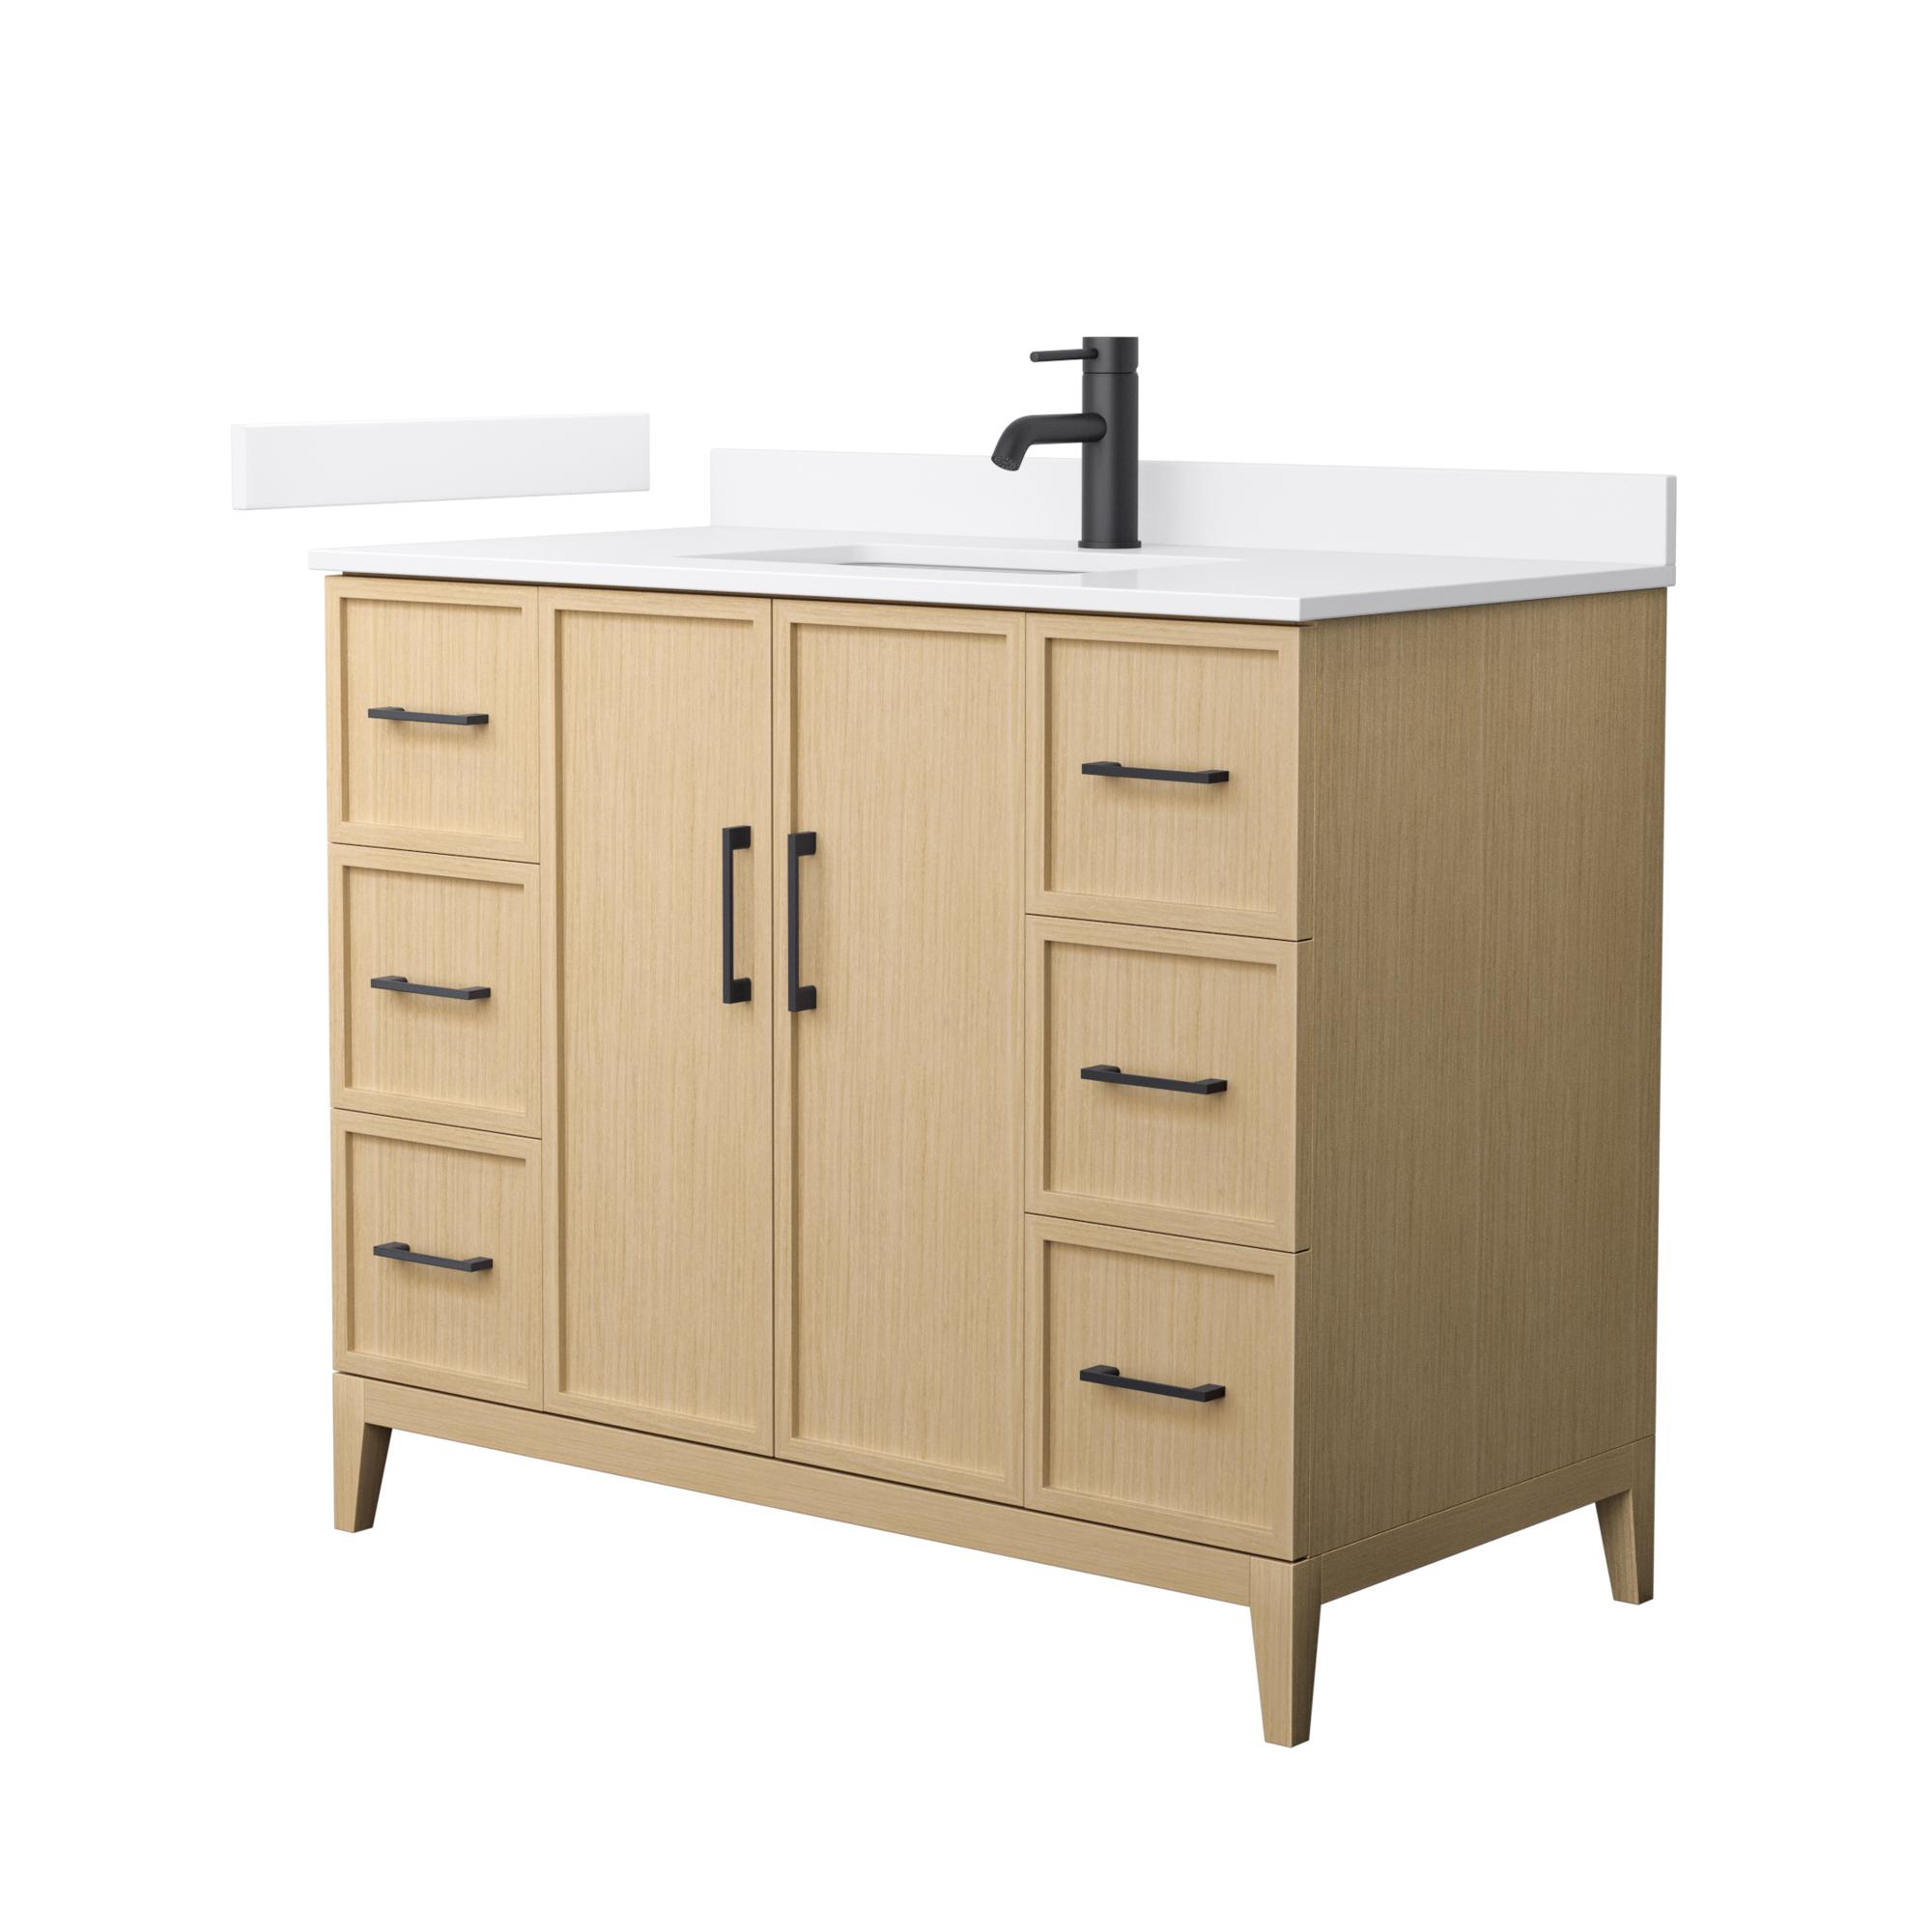 42" Transitional Single Vanity Base in White Oak, 7 Top Options with 2 Hardware Option